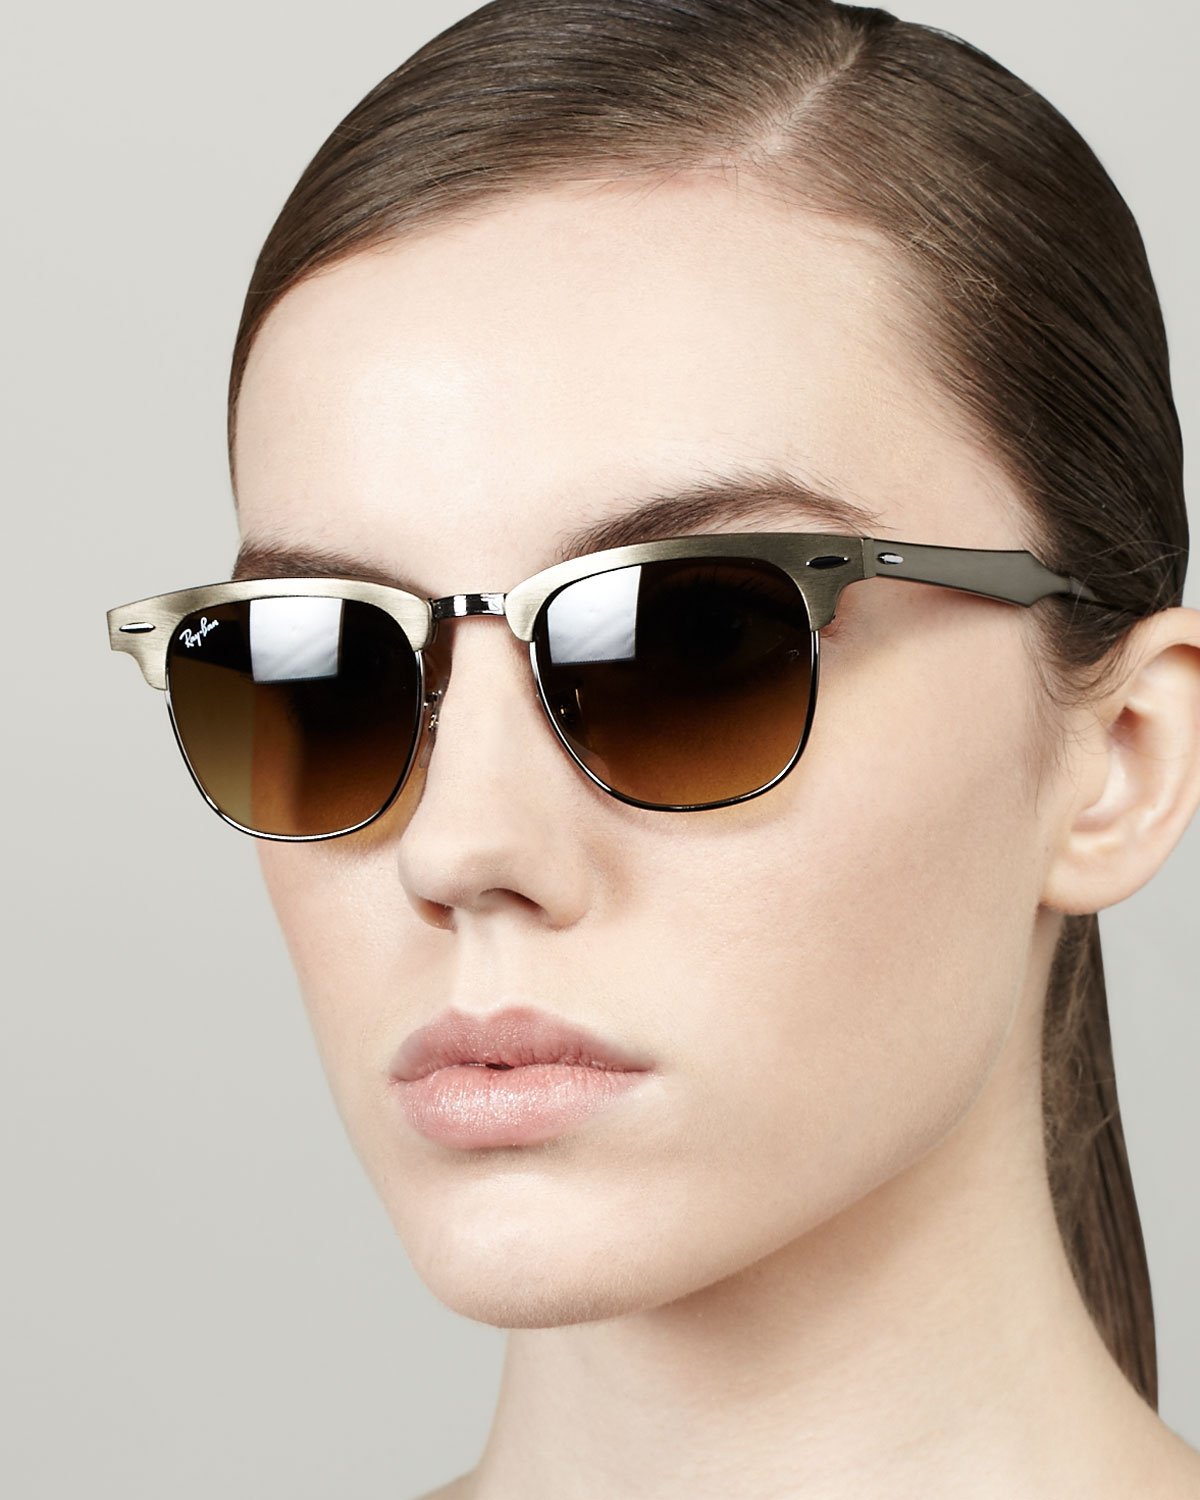 Womens Ray Ban Clubmaster Sunglasses Shop Clothing Shoes Online